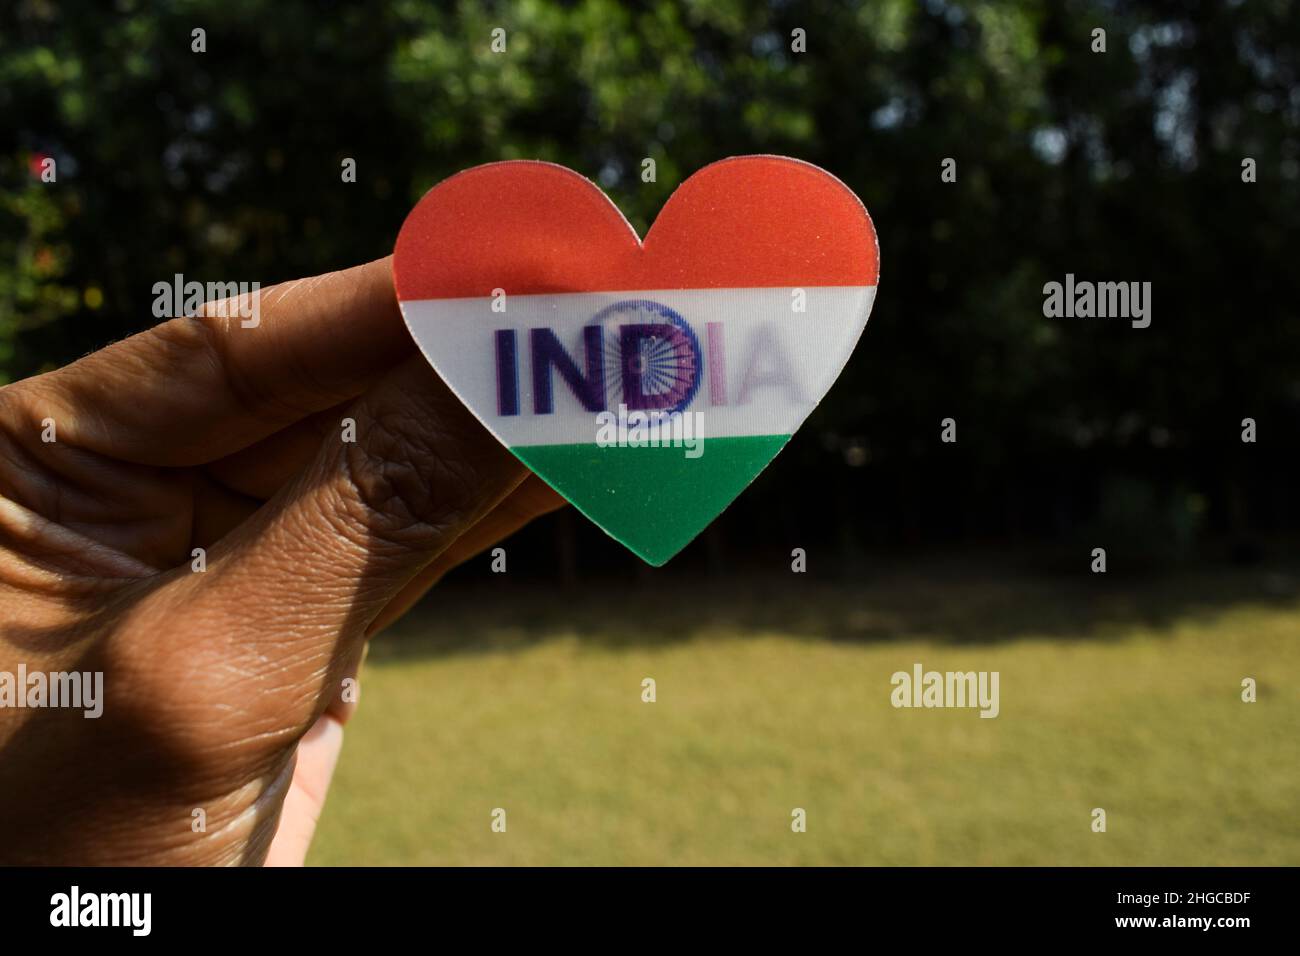 Happy republic day and Happy Independence day theme Indian tricolor flag 3 dimentional heart shape. India flag badge pin stickers design background Stock Photo